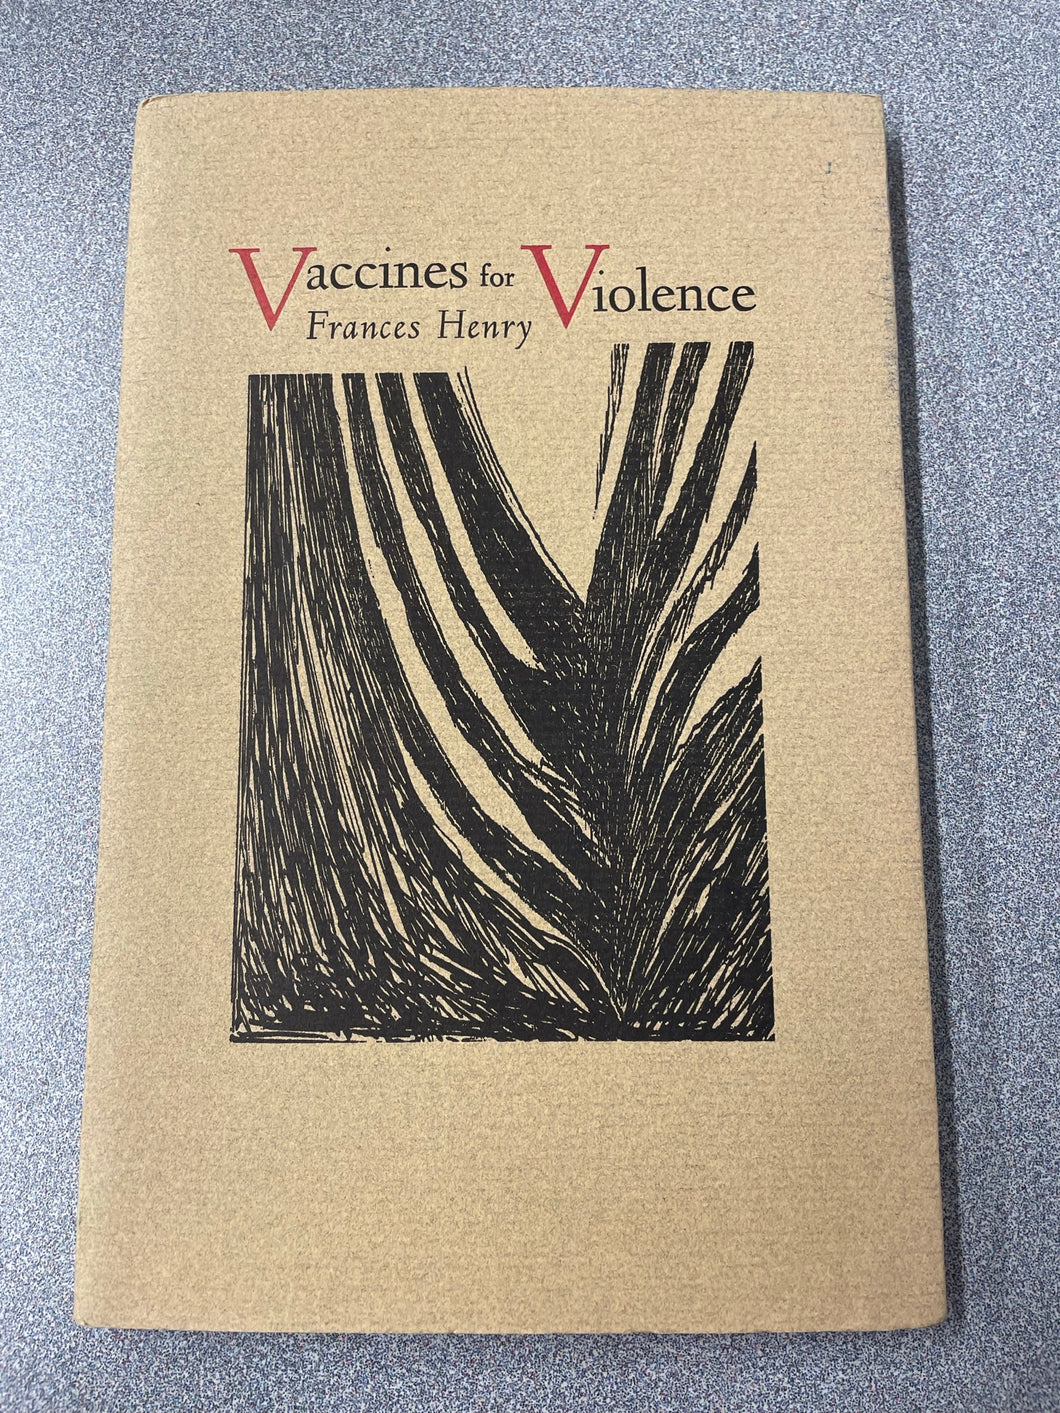 Vaccines for Violence, Henry, Frances [2008] TS 2/23